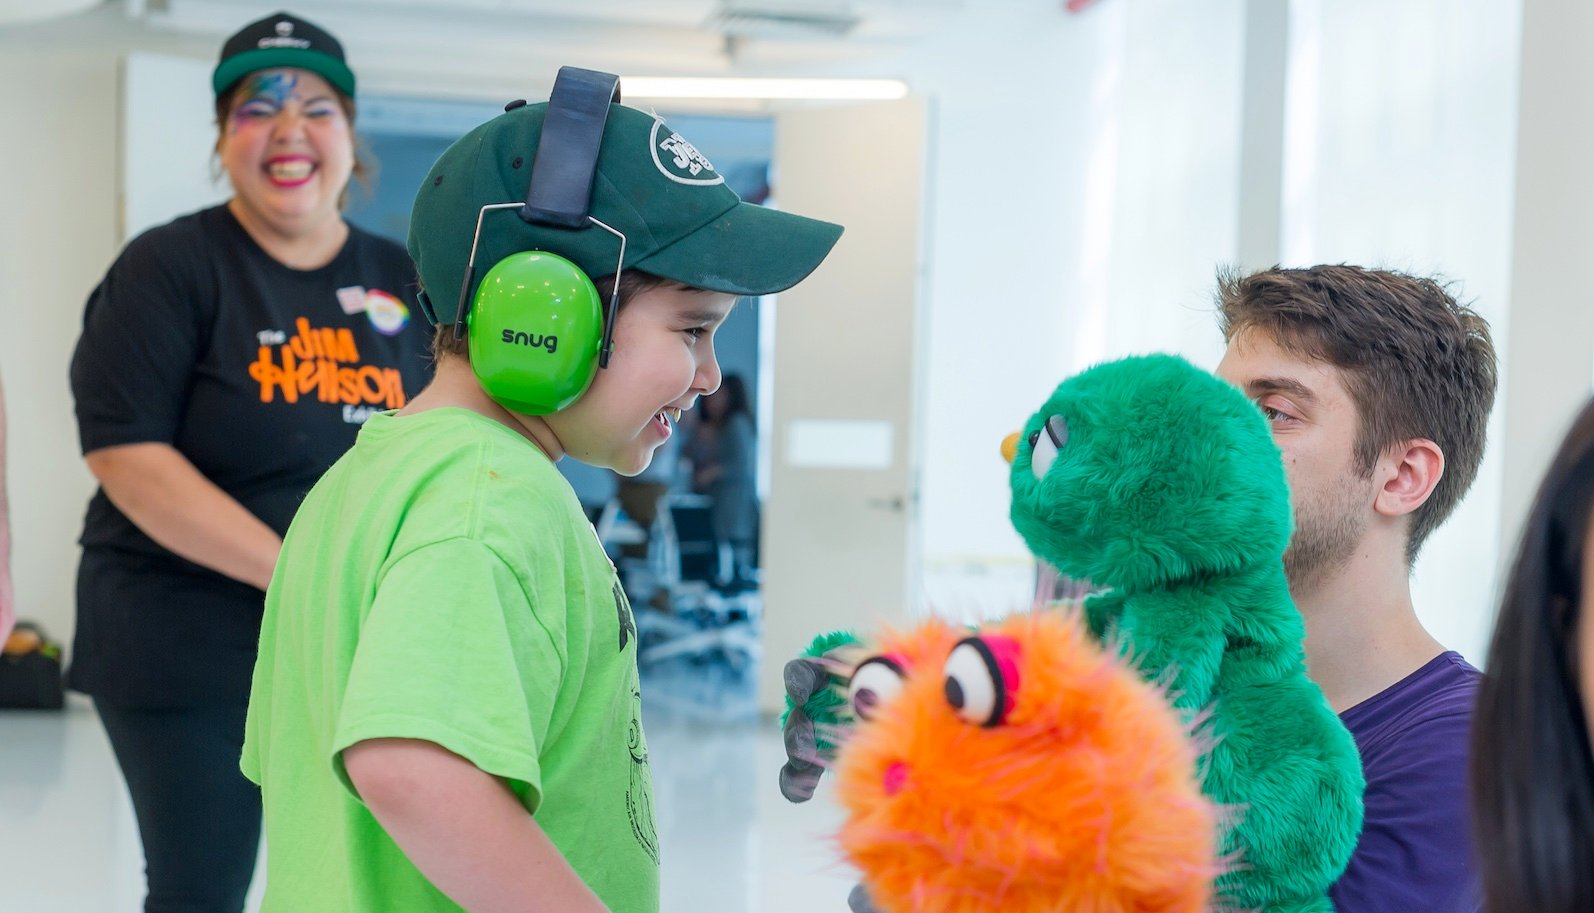 A little boy with green headphones and a green shirt interacts with a green puppet ...another orange puppet is in foreground.